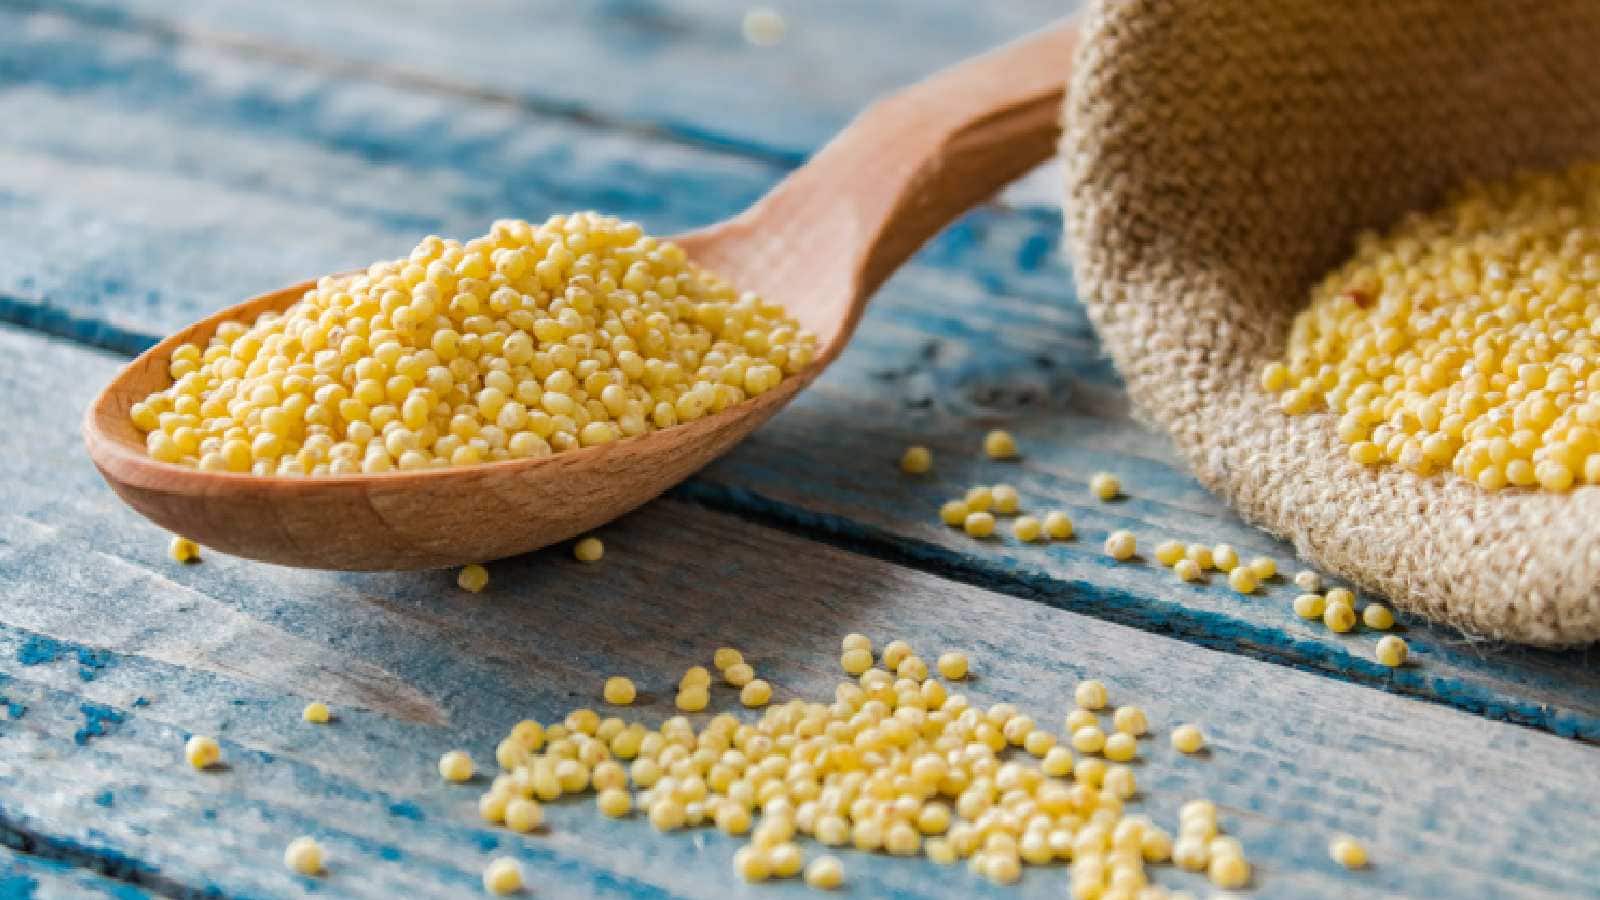 Reasons to Make Millets a Superfood Staple in Your Diet